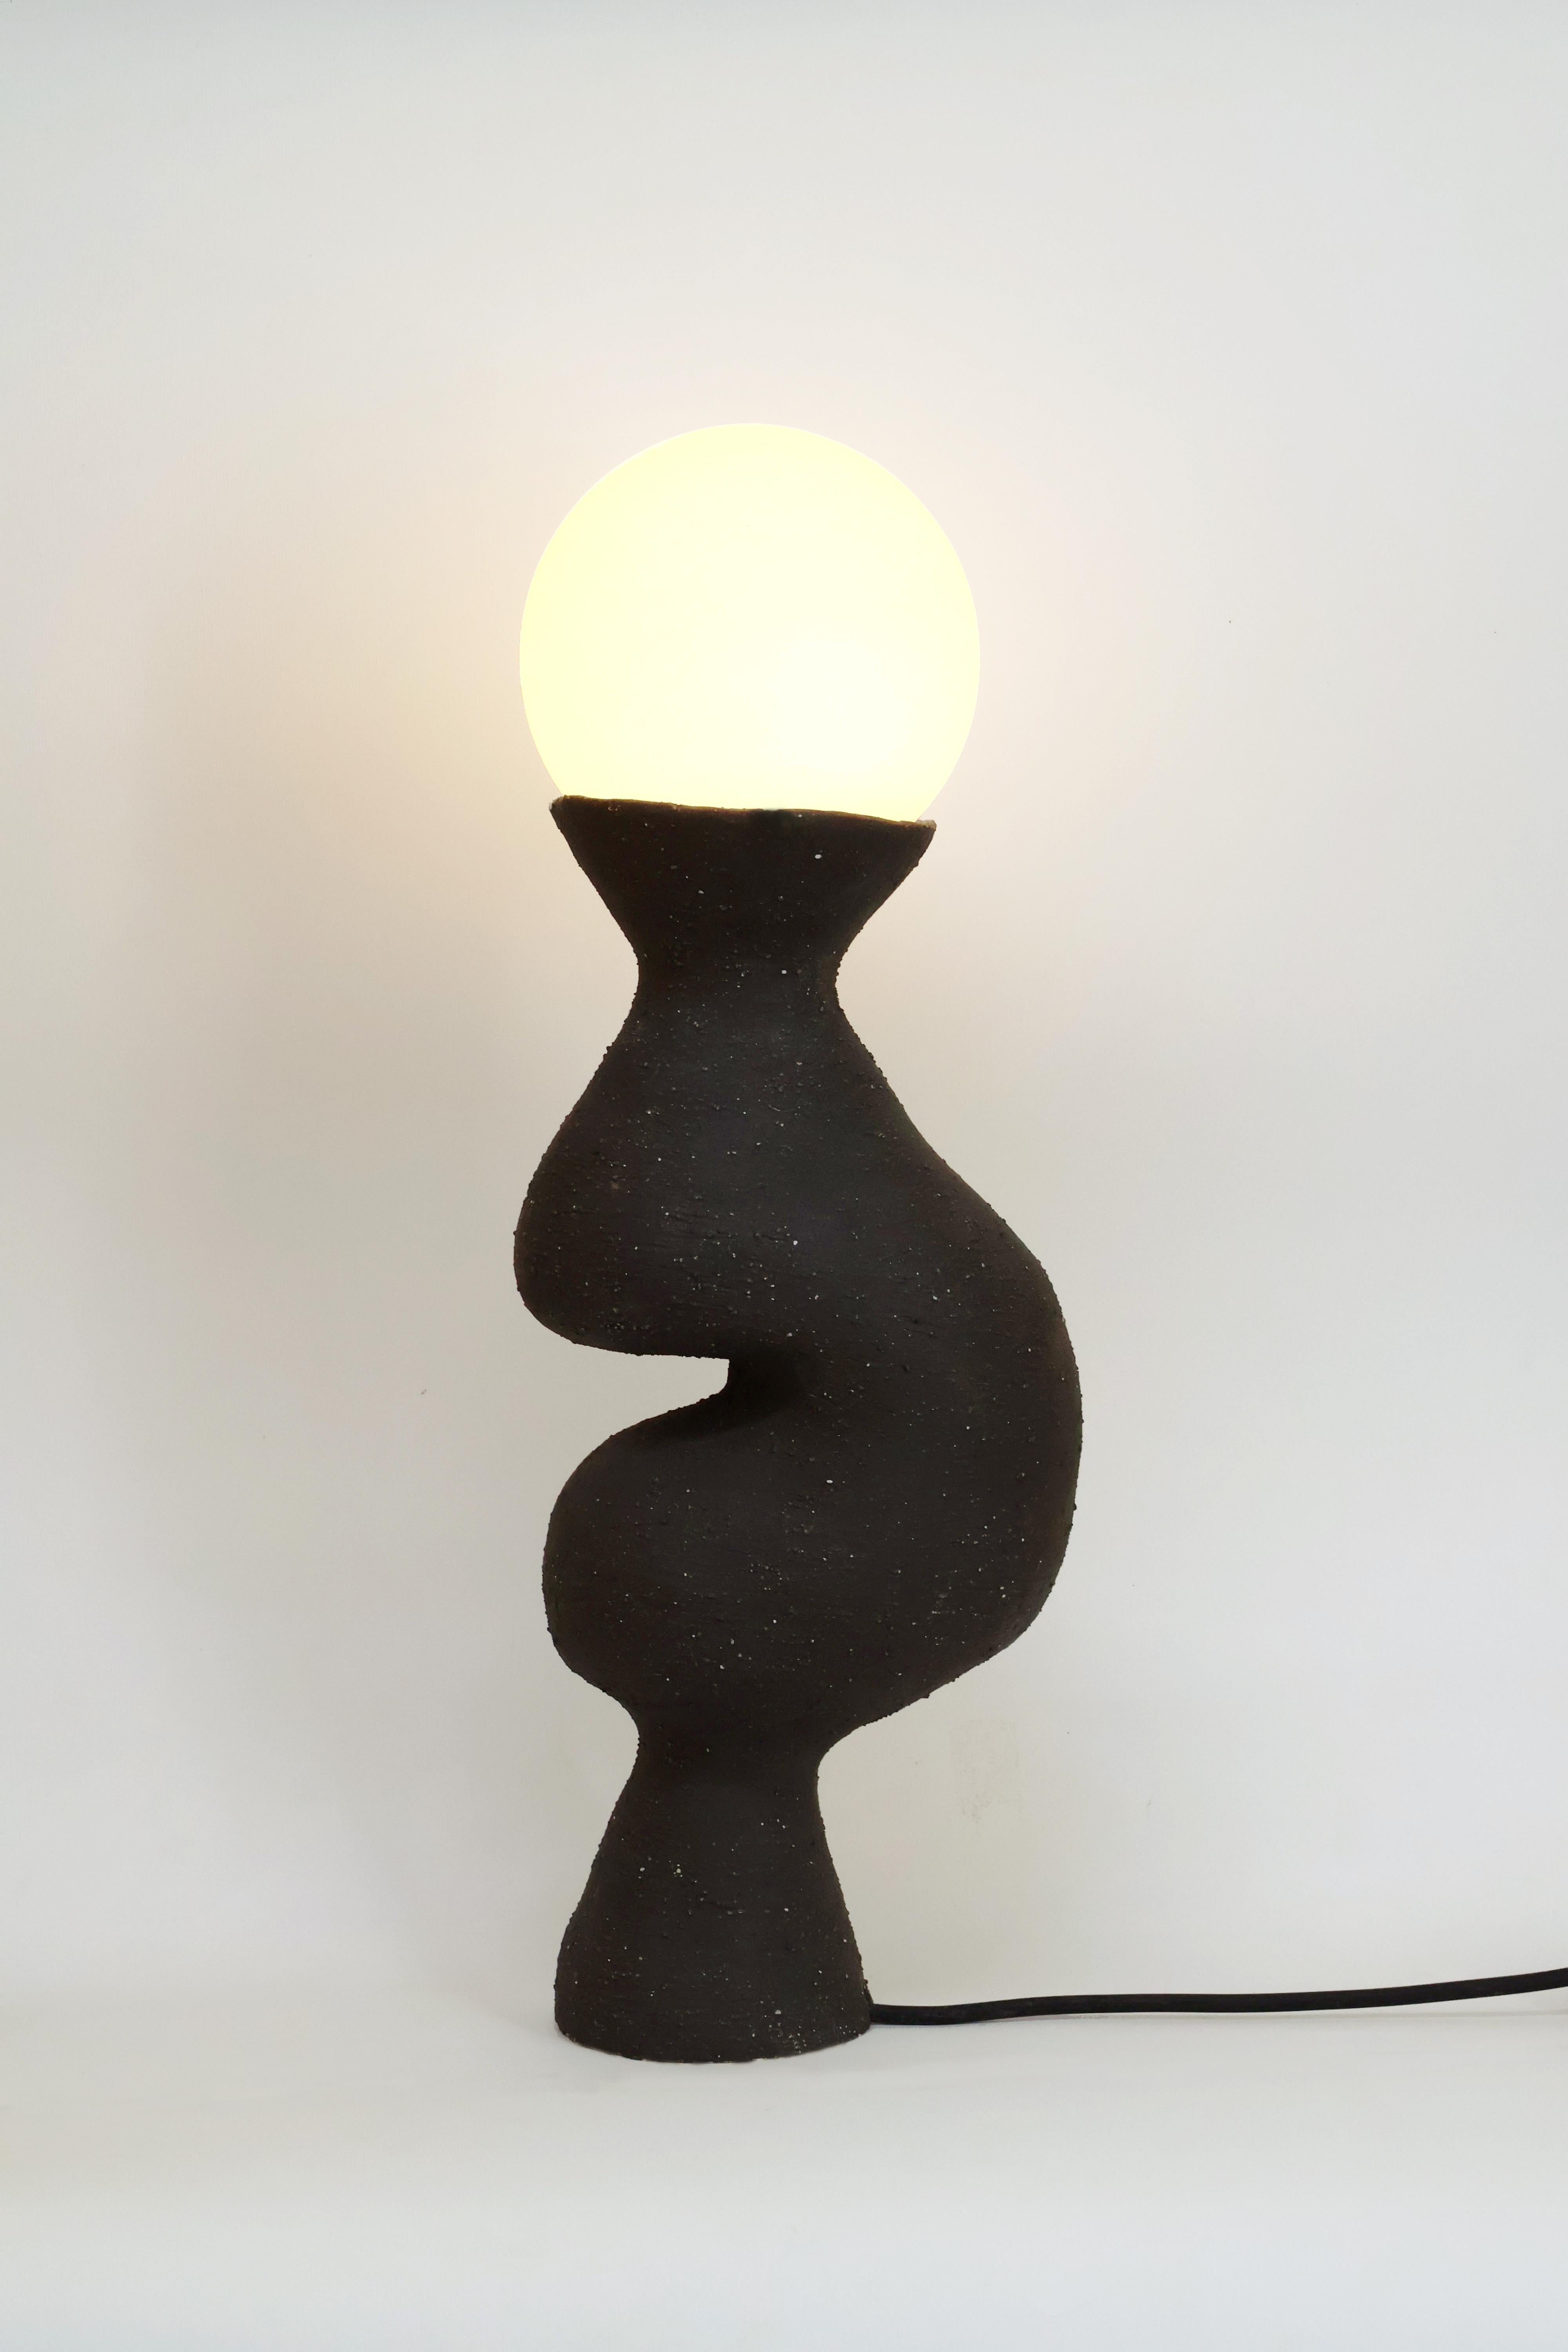 Silueta II Table Lamp by Camila Apaez
Unique
Materials: Ceramic, Glass
Dimensions: W 14 x D 20 x H 53 cm

Ila Ceramica emerged from a process of inner inquiry where ceramics became a space for presence, silence, touch and patience. Camila discovered